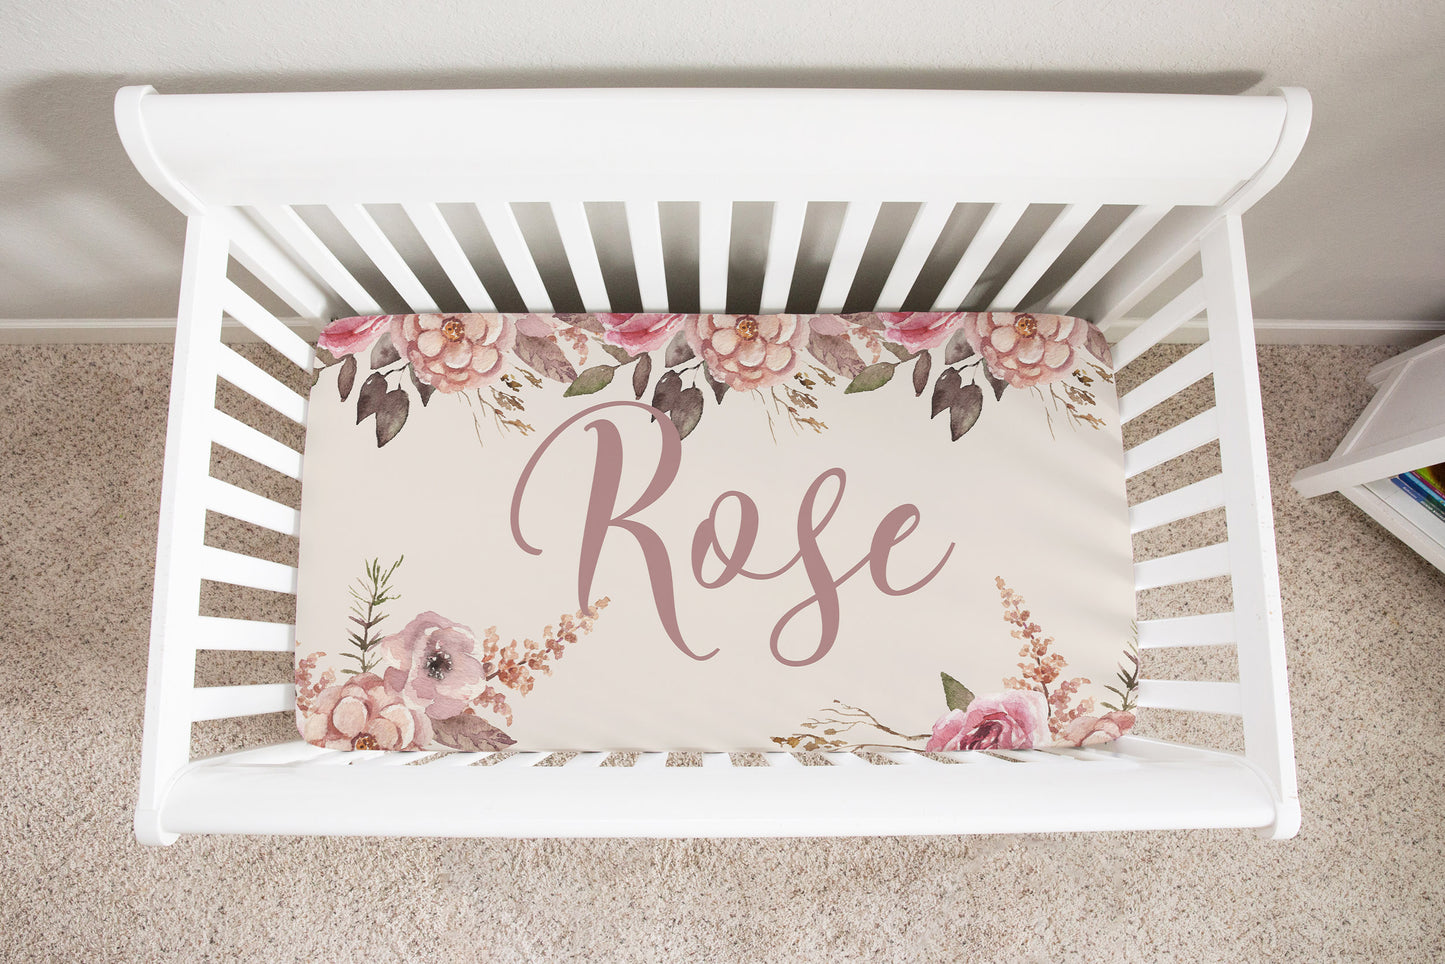 Floral Personalized Minky Crib Sheet, Baby Girl Nursery Bedding - Rose Bliss